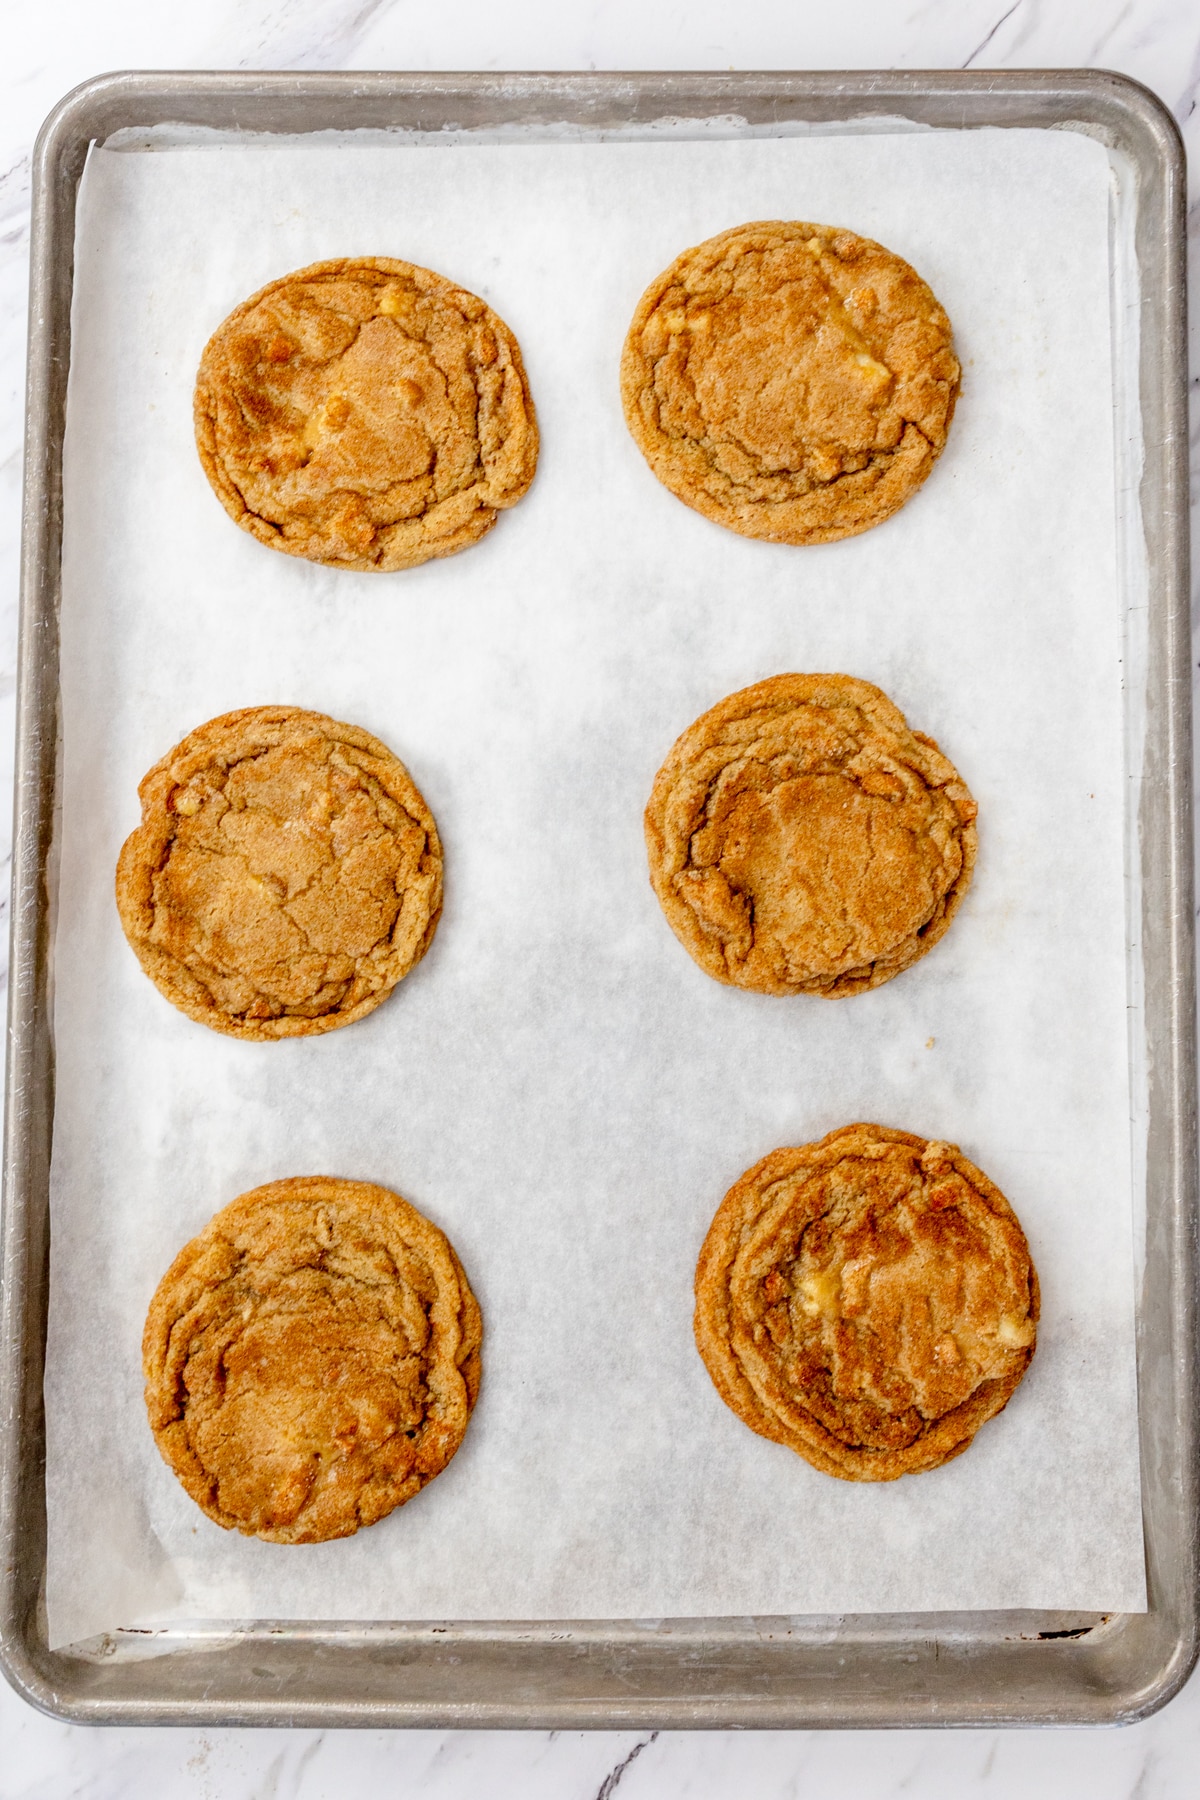 Top view of baking tray lined with parchment paper with freshly baked Caramel Apple Cookies on it.